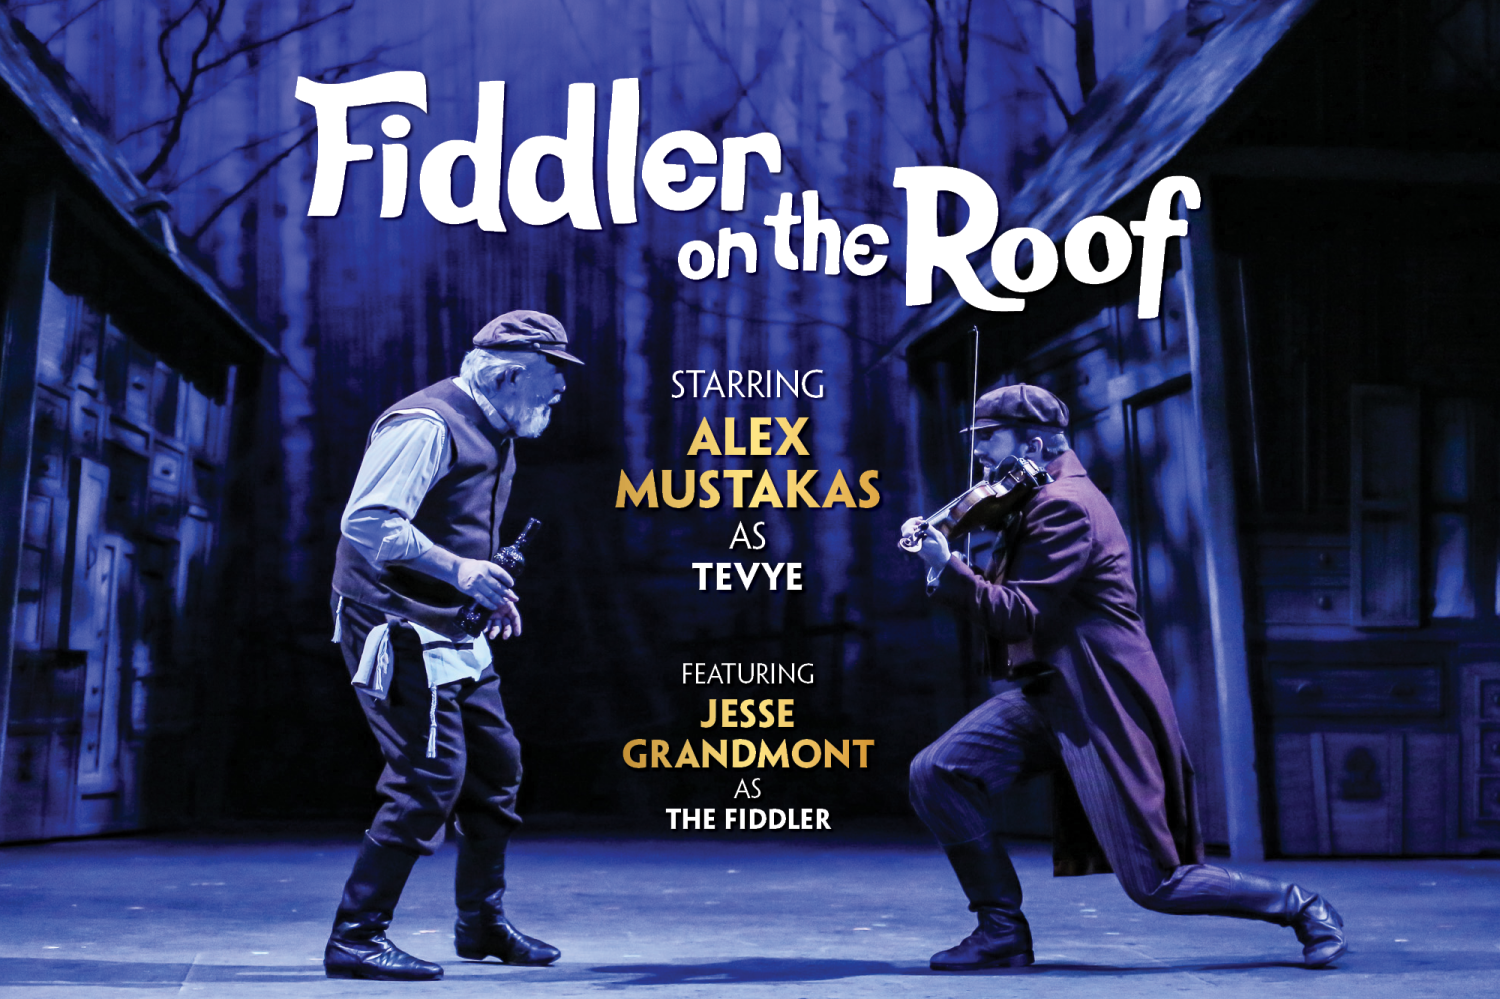 Show artworkProduction photo of Fiddler on the Roof showing the characters Tevye and The Fiddler dancing on stage.